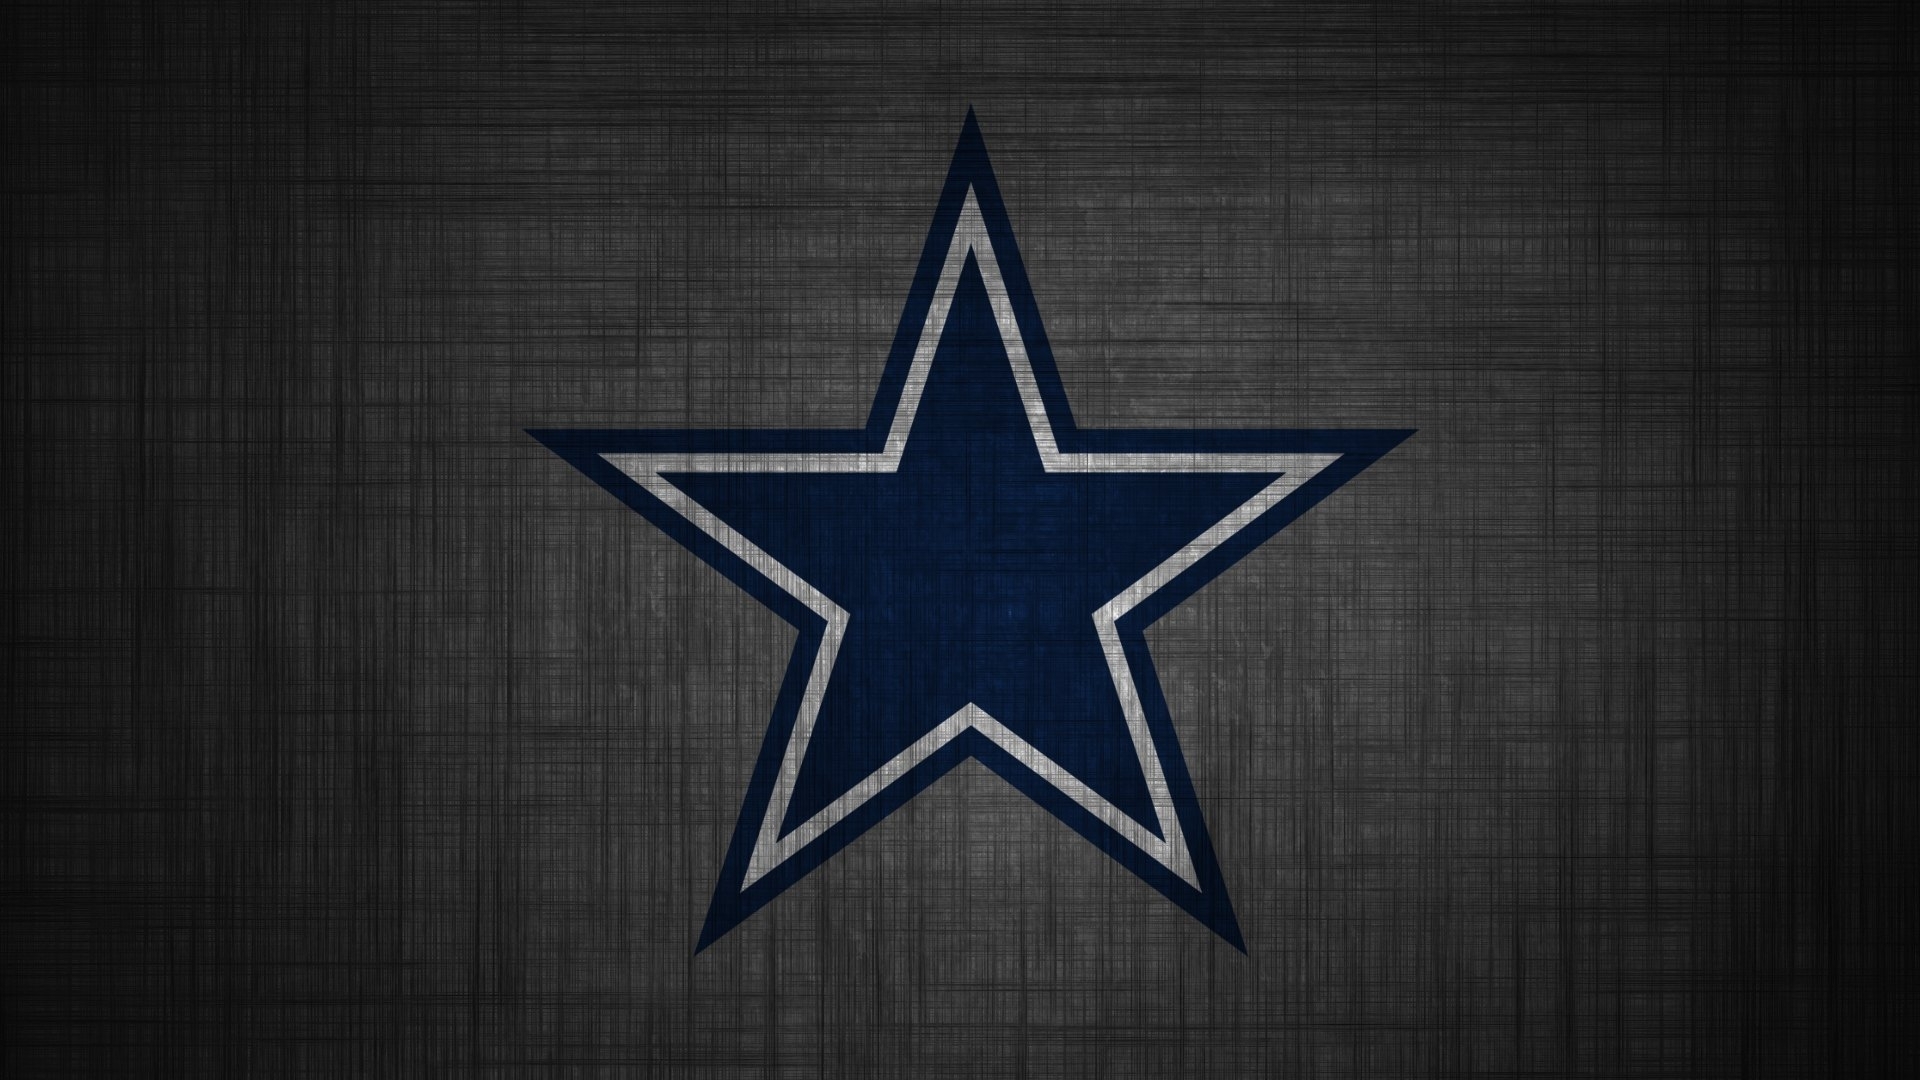 10 Best Dallas Cowboys Star Wallpaper FULL HD 1080p For PC Background